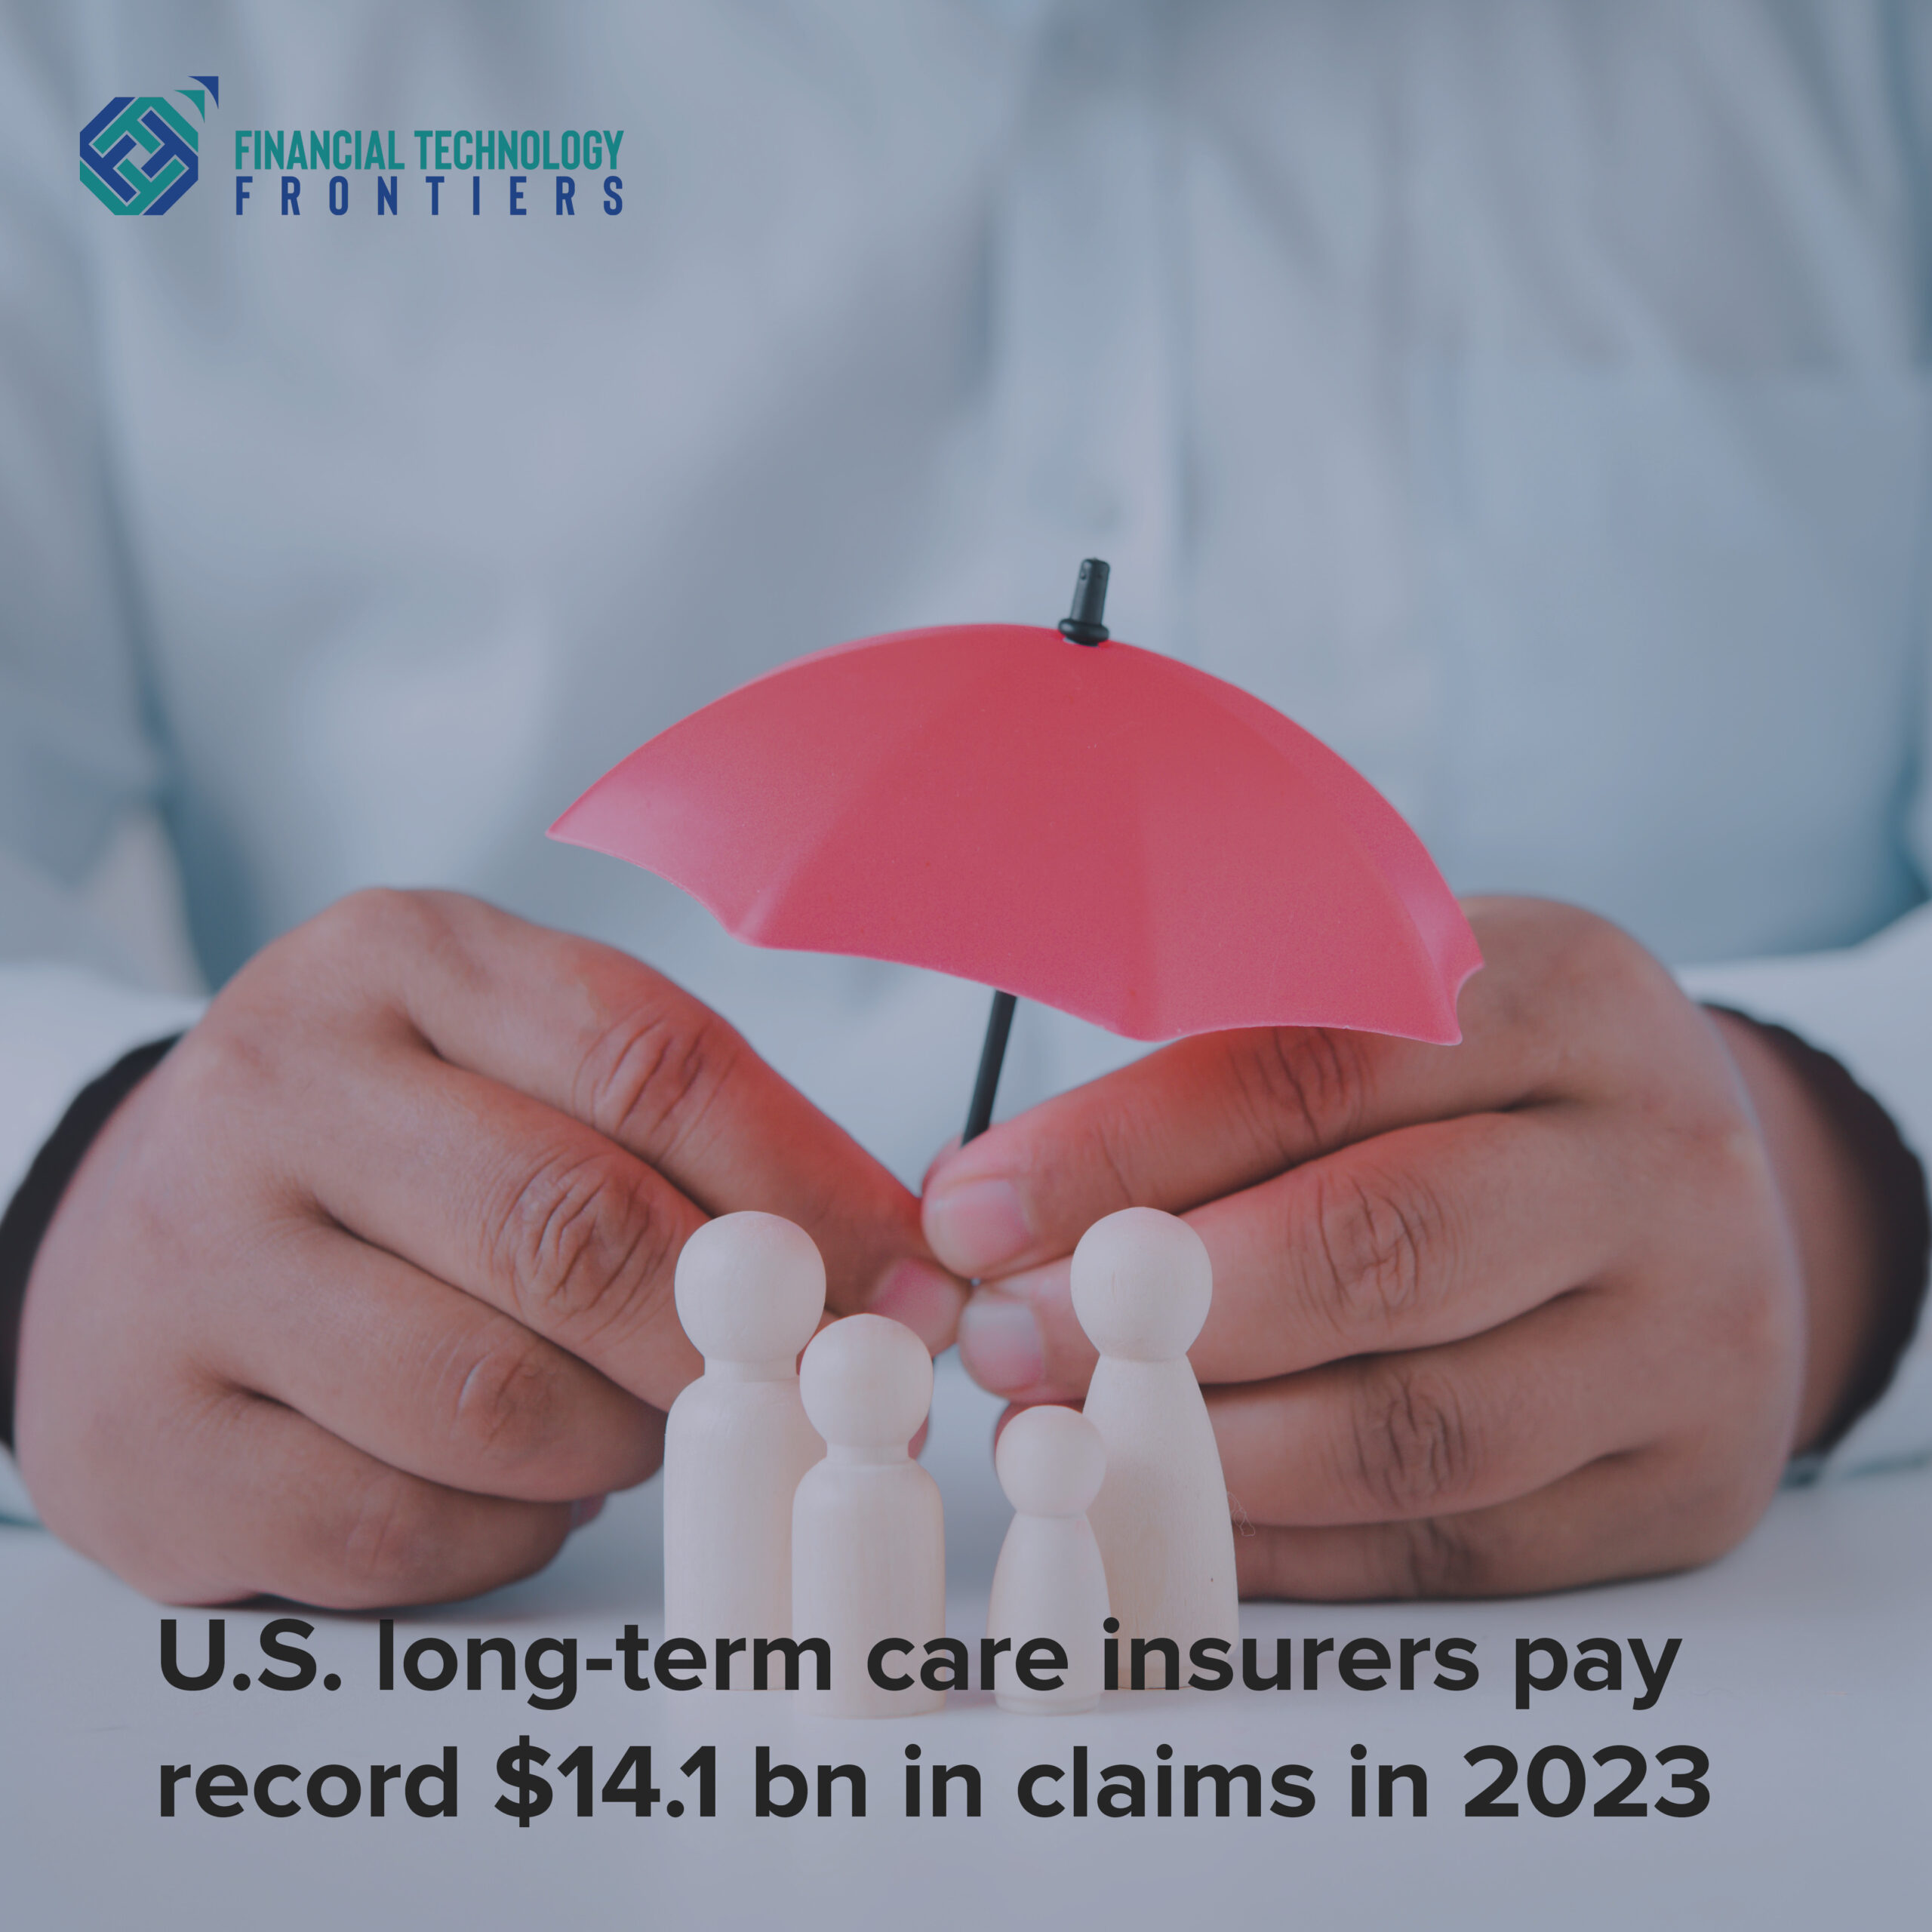 U.S. long-term care insurers pay record $14.1 bn in claims in 2023